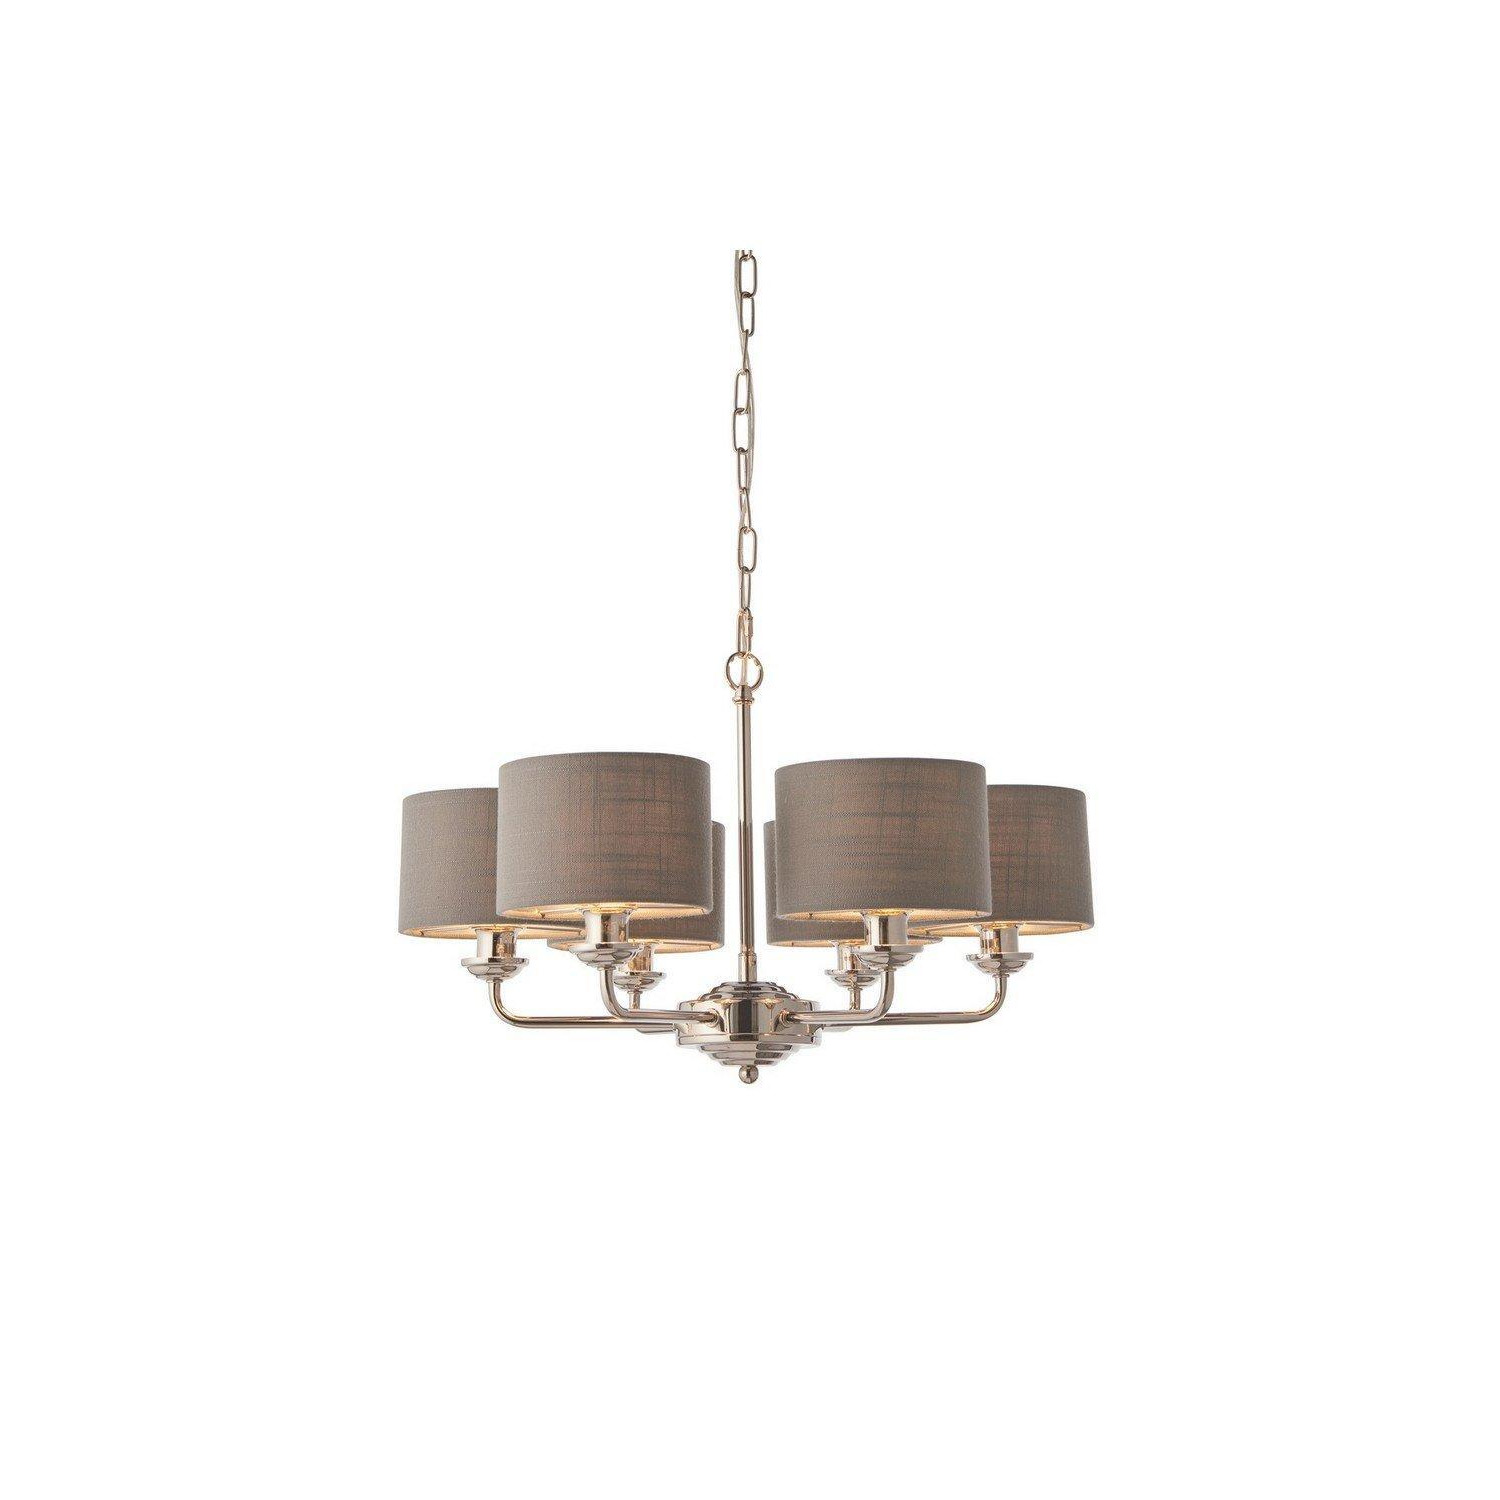 Highclere Pendant Light Bright Nickel Plate Charcoal Fabric Multi Arm Shade - image 1